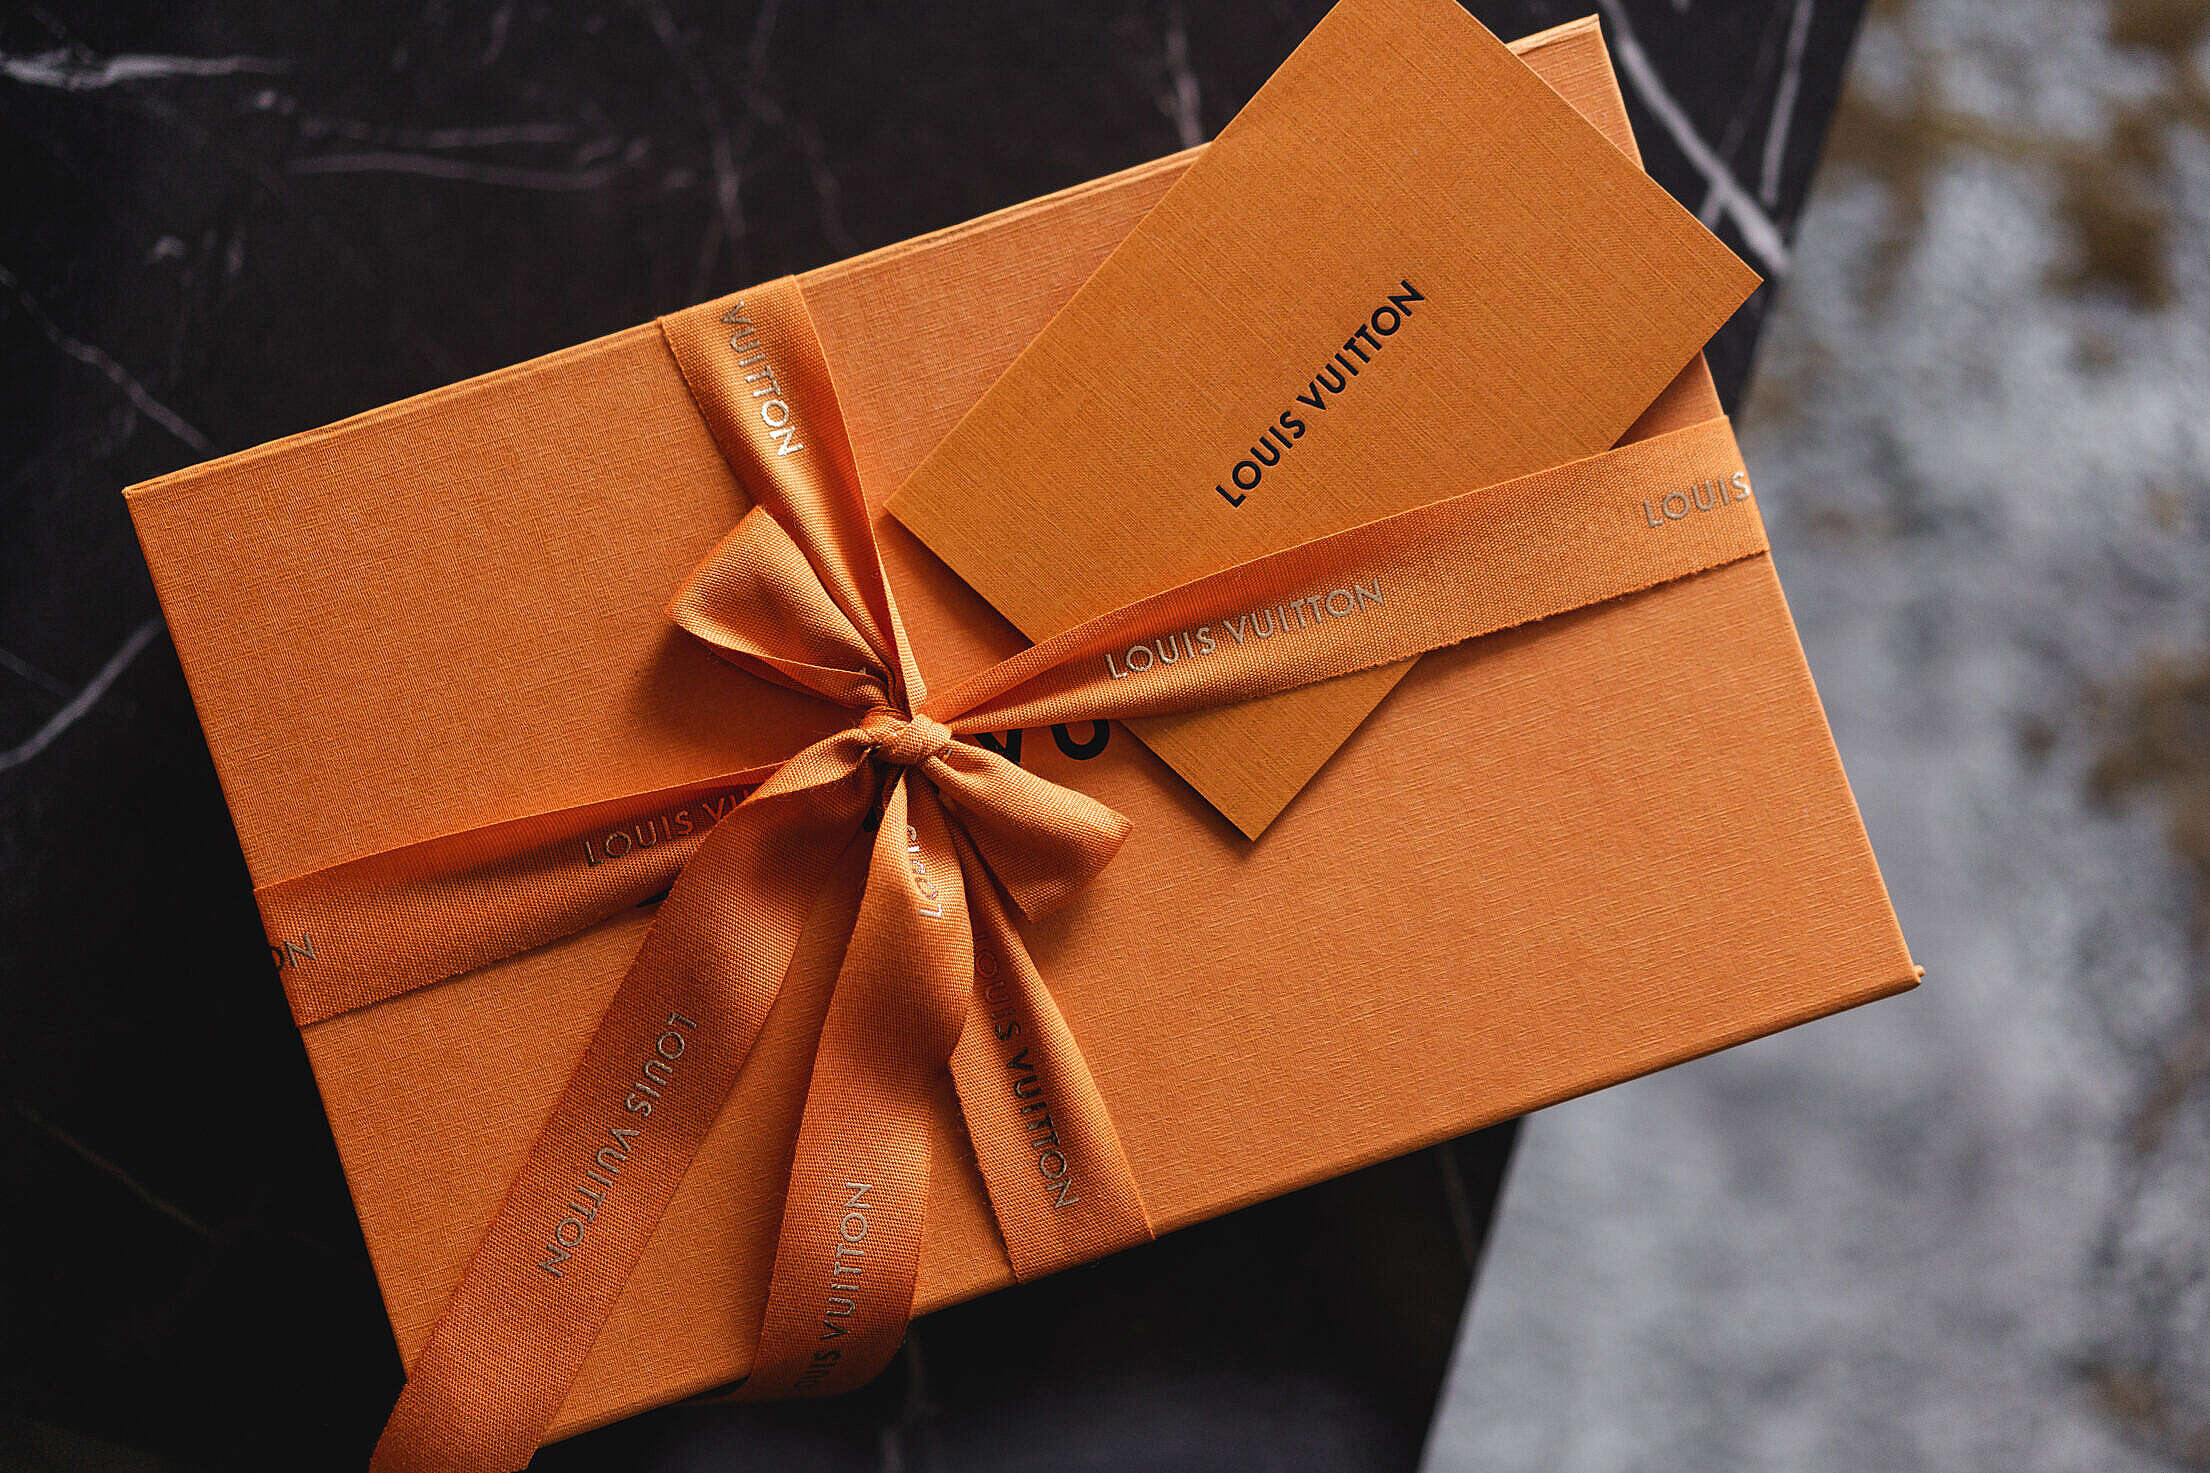 Classic Famous Louis Vuitton Orange Product Box Packaging with a Bow Free  Stock Photo